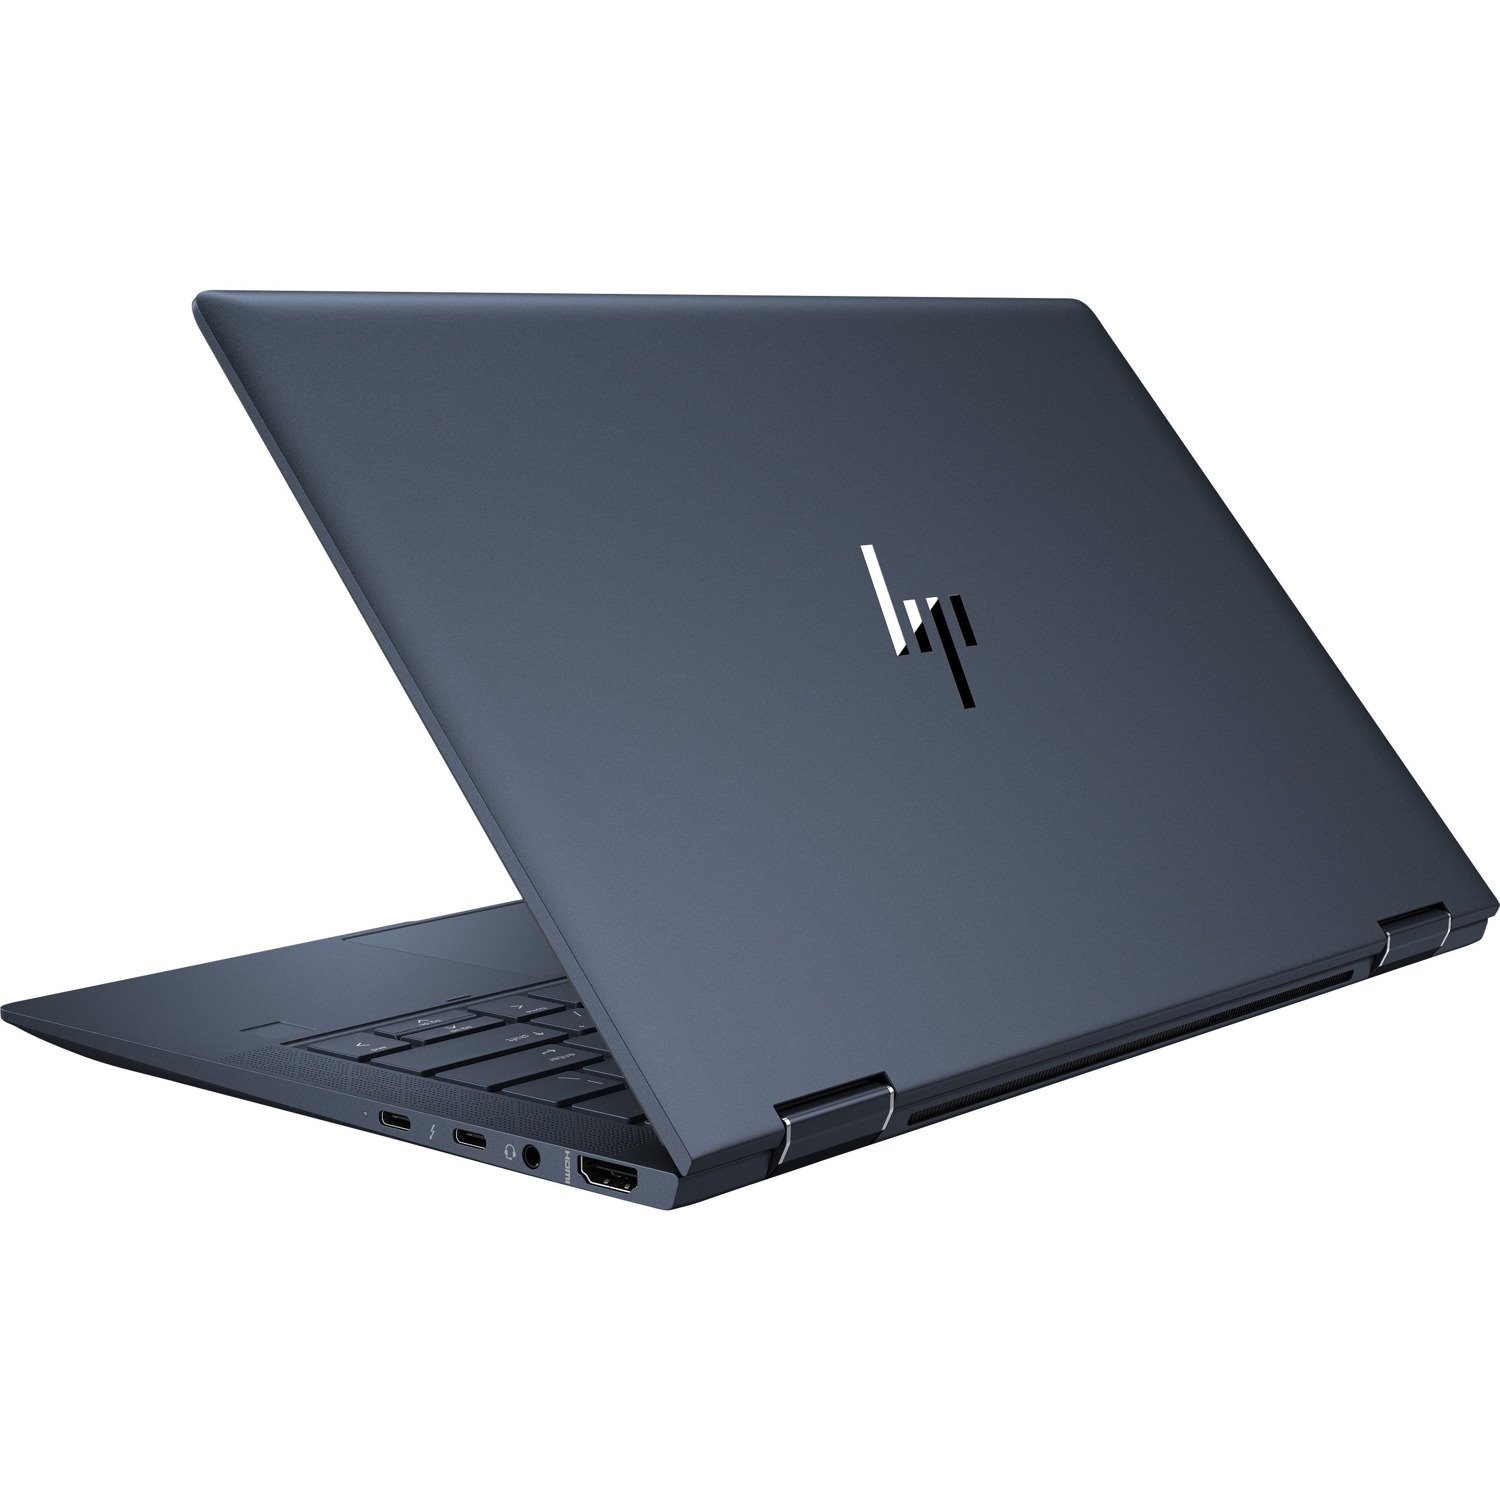 HP Elite Dragonfly G2 LTE Advanced 13.3" Touchscreen Convertible 2 in 1 Notebook - Full HD - 1920 x 1080 - Intel Core i7 11th Gen i7-1185G7 Quad-core (4 Core) 3 GHz - 16 GB Total RAM - 512 GB SSD